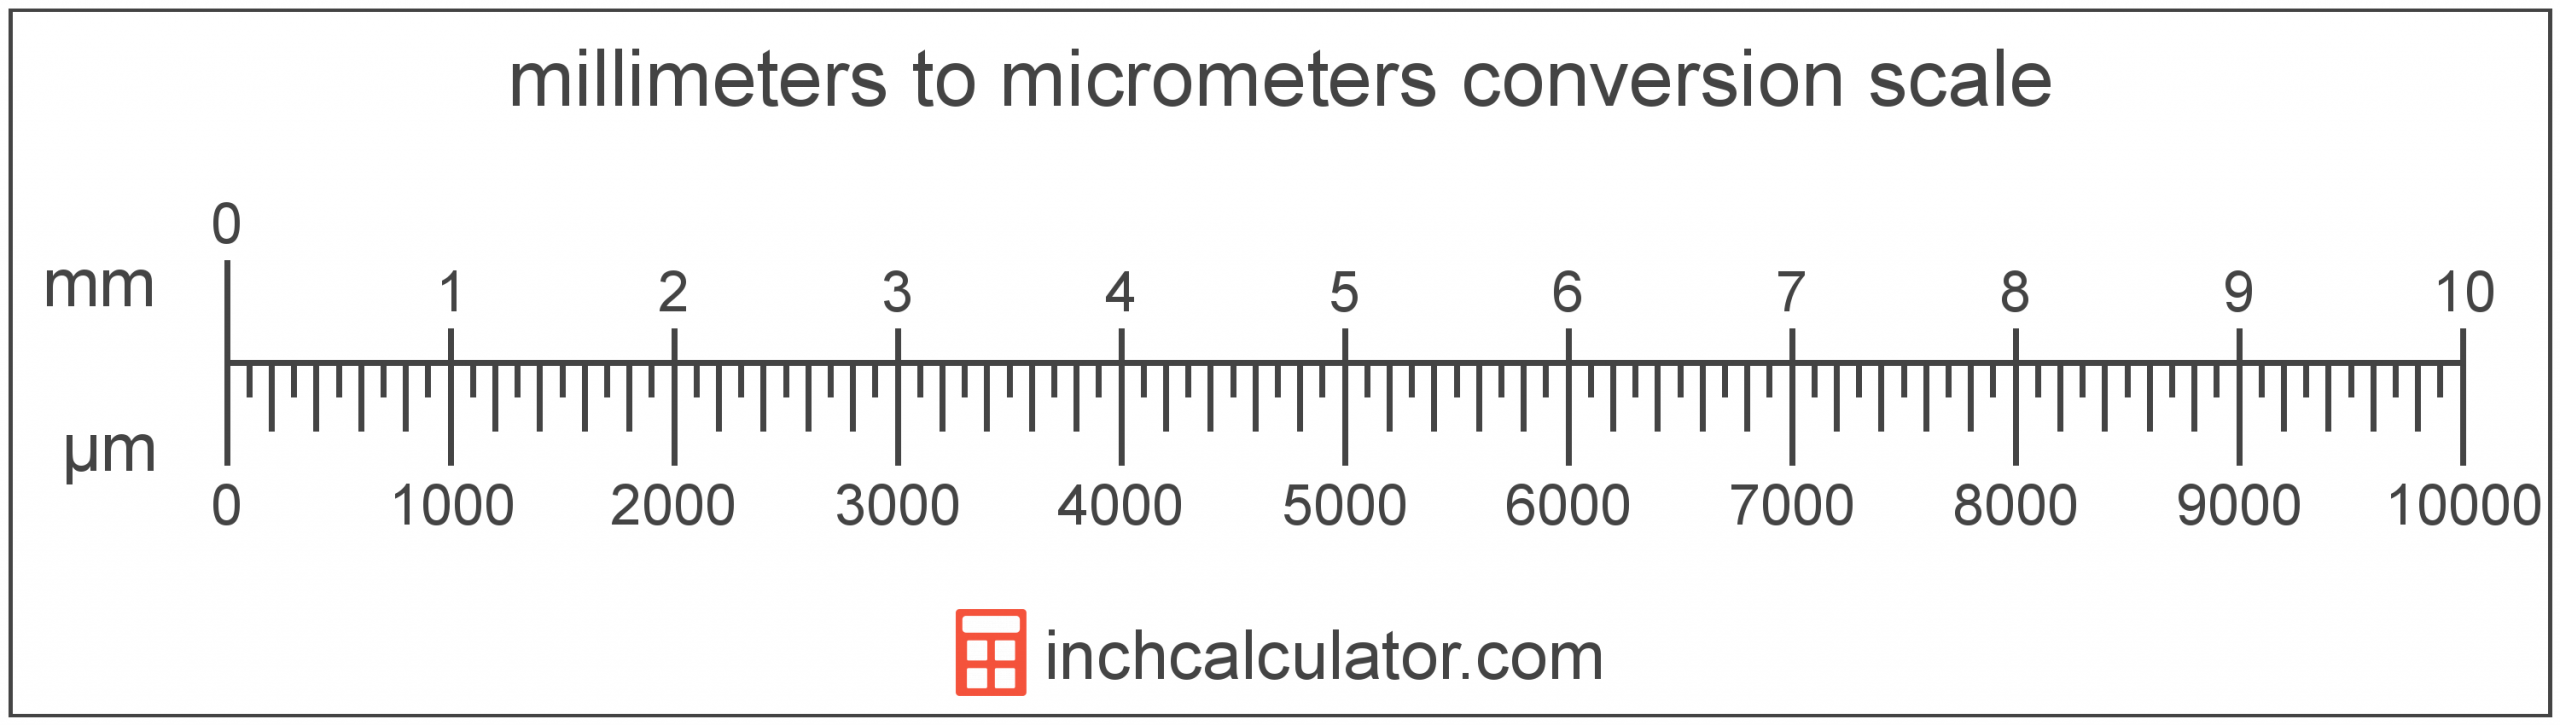 Micrometers To Millimeters Conversion (Μm To Mm)